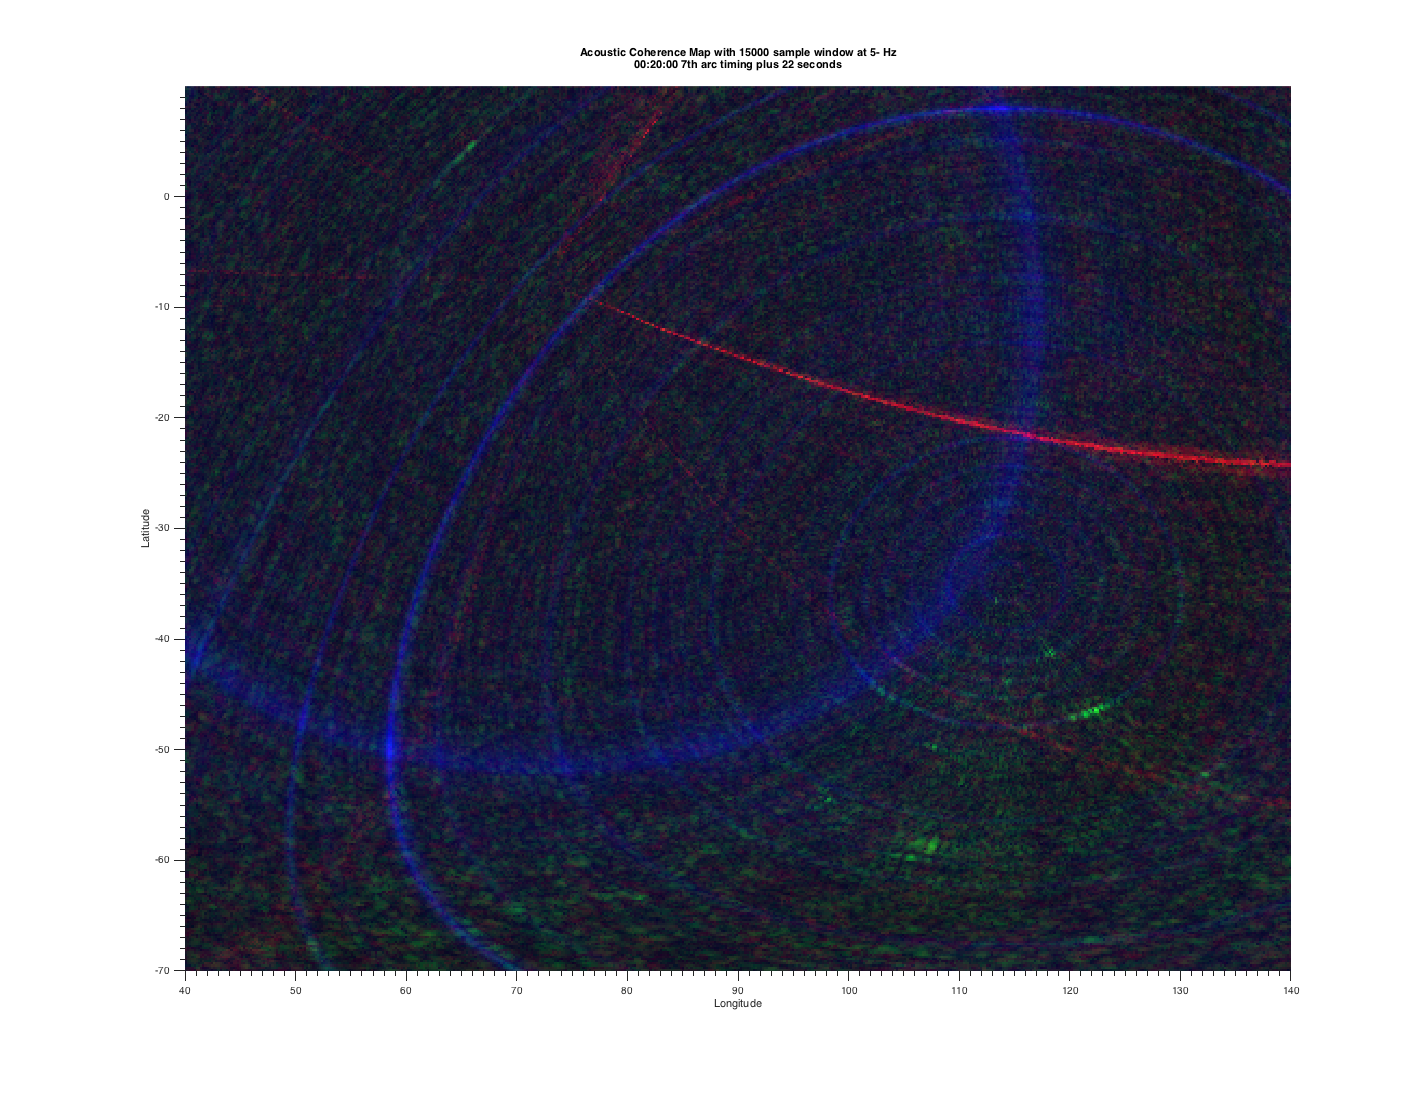 An intensity plot for 7th Arc+22sec event timing.